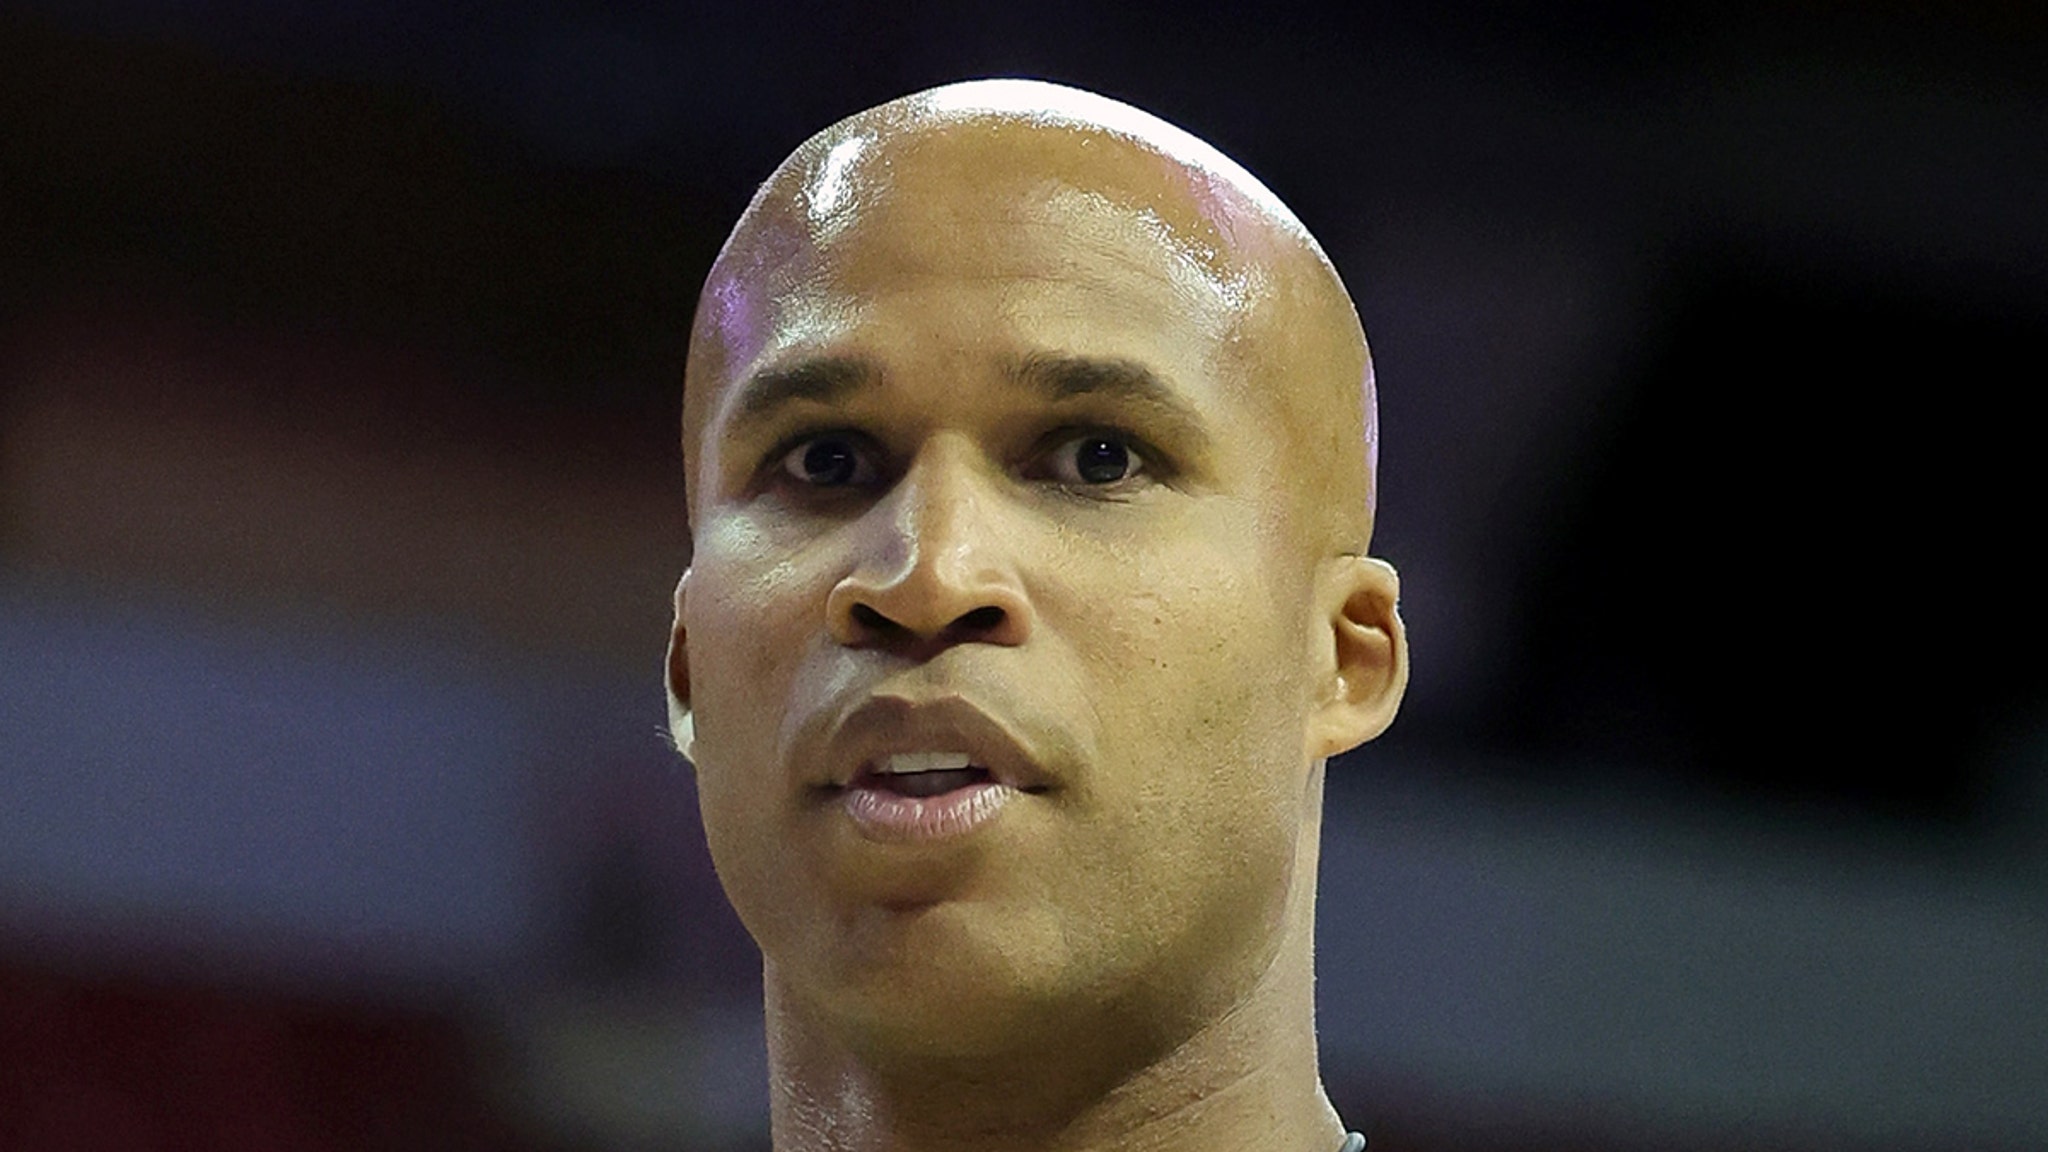 Police offer $20,000 reward for helping solve homicide case of Richard Jefferson's father